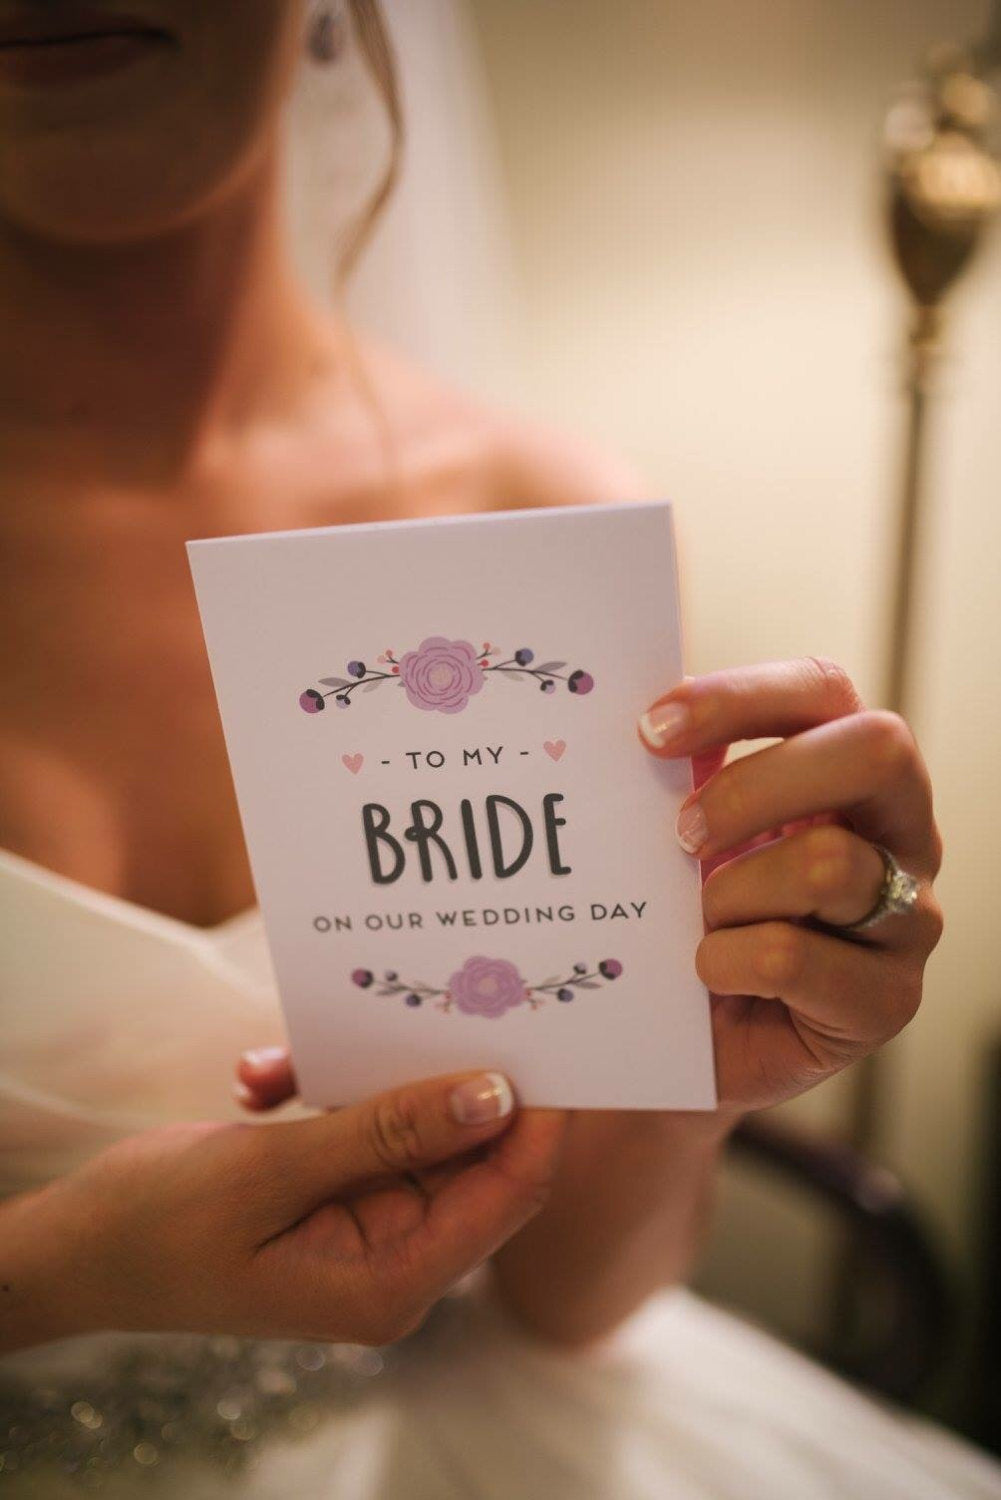 Customer photo of the 'To my bride on our wedding day' card in purple